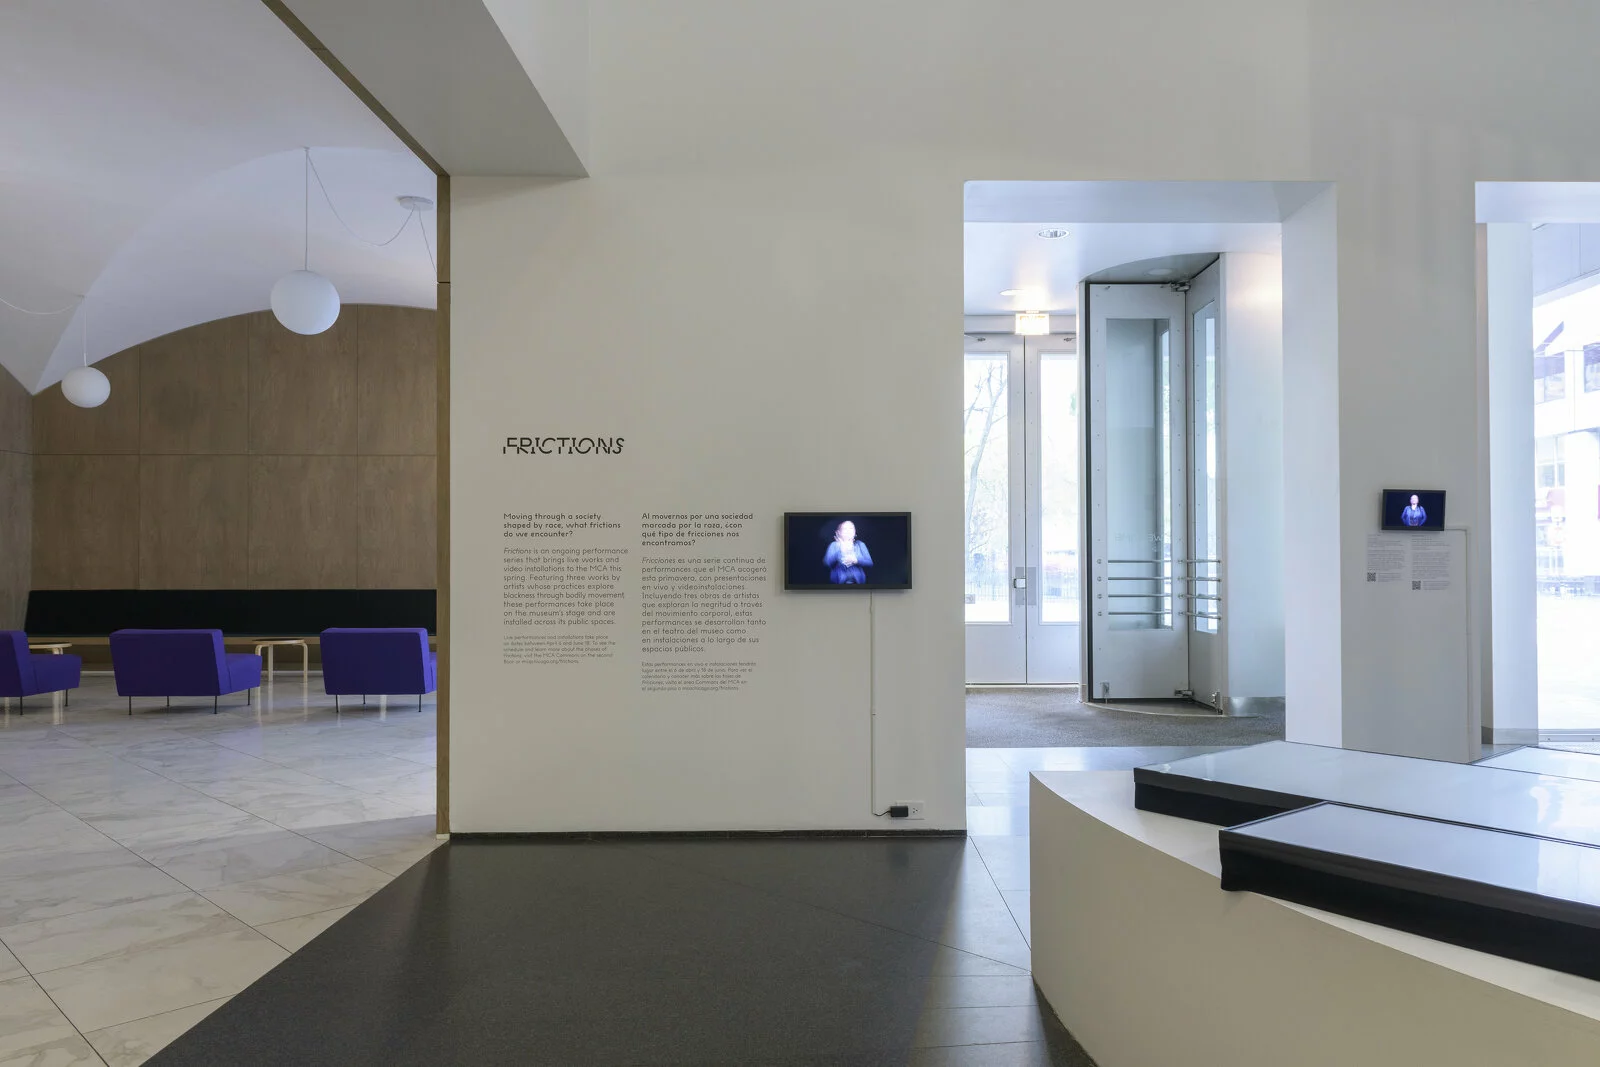 View of exhibition text next to a small video screen on a white wall.